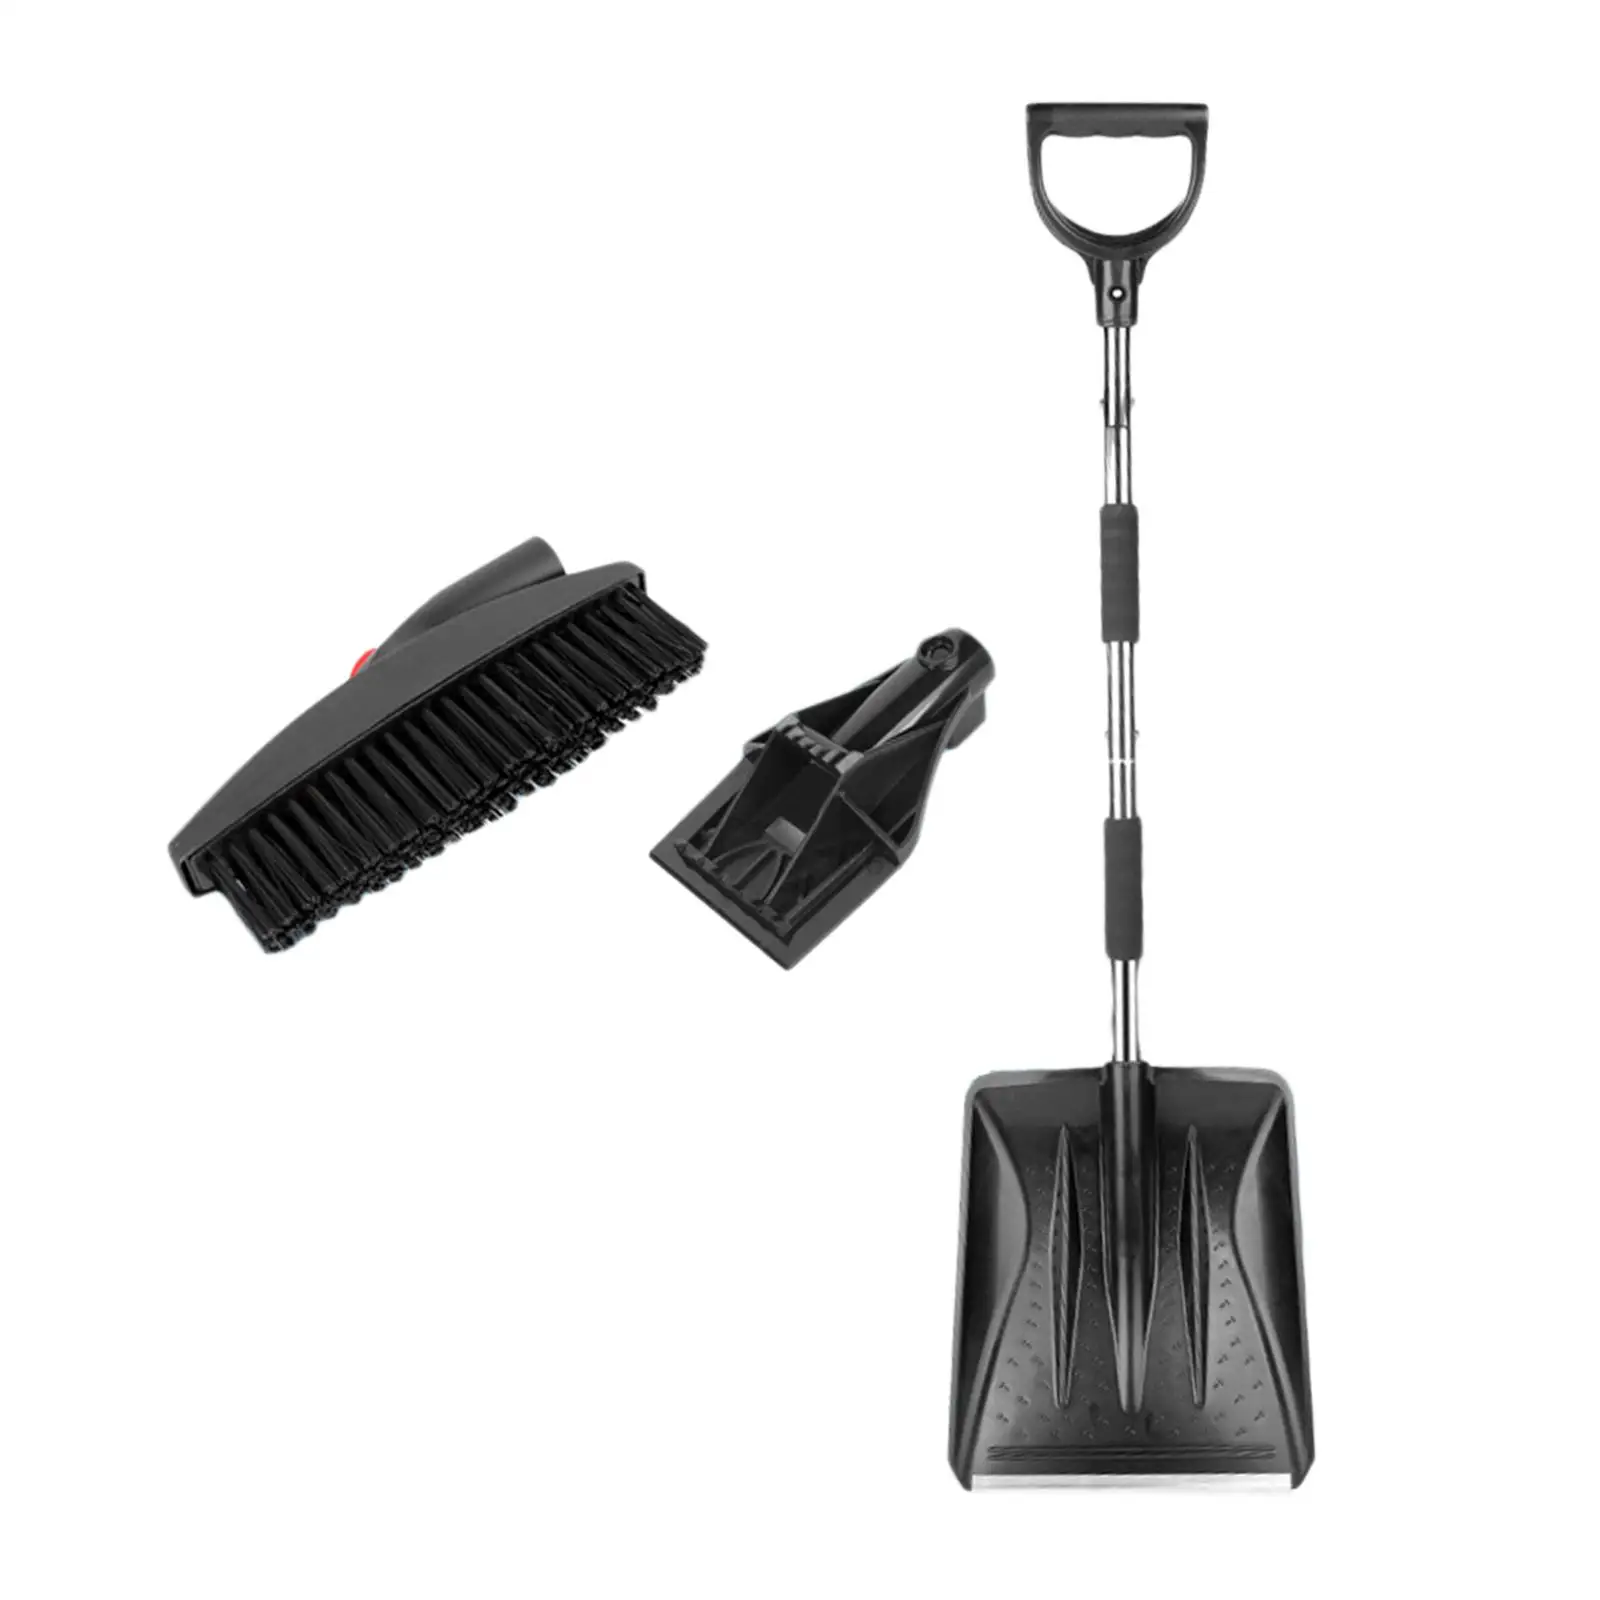 Snow Brush Snow Spade for Car Snow Removal Tools 3 in 1 Snow Removal Brush for Car Accessories Winter Outdoor